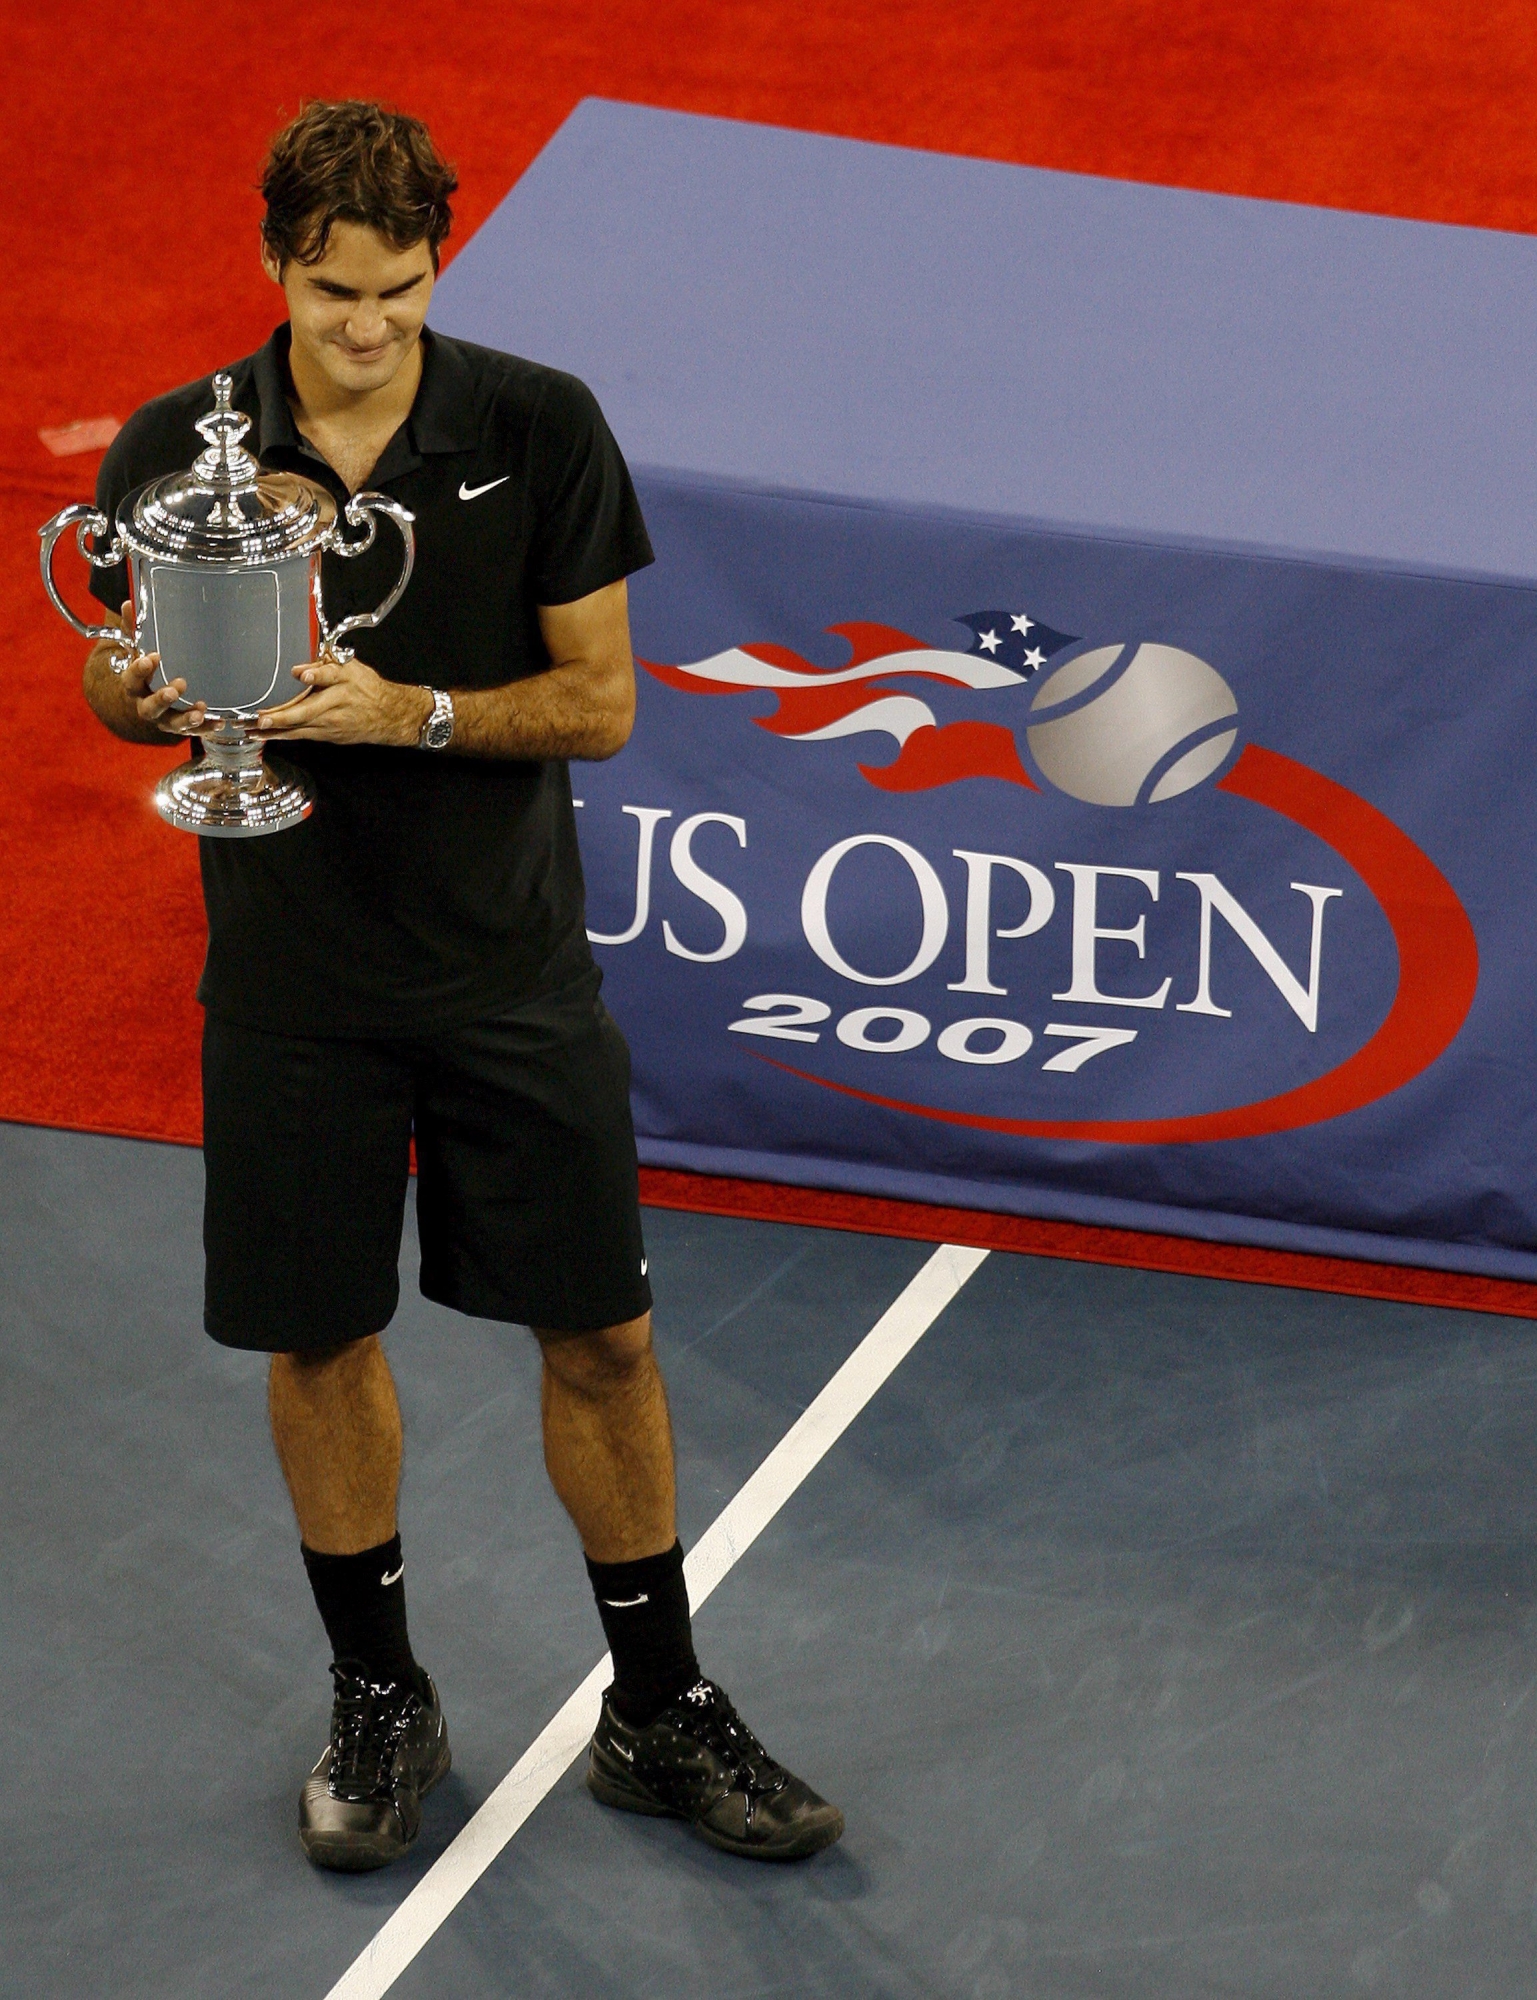 epa01115771 Roger Federer of Switzerland holds up the championship trophy after defeating Novak Djokovic of Serbia to win the men's final on the last day of the 2007 US Open tennis tournament in Flushing Meadows, New York, USA, 09 September 2007.  EPA/JASON SZENES USA TENNIS US OPEN